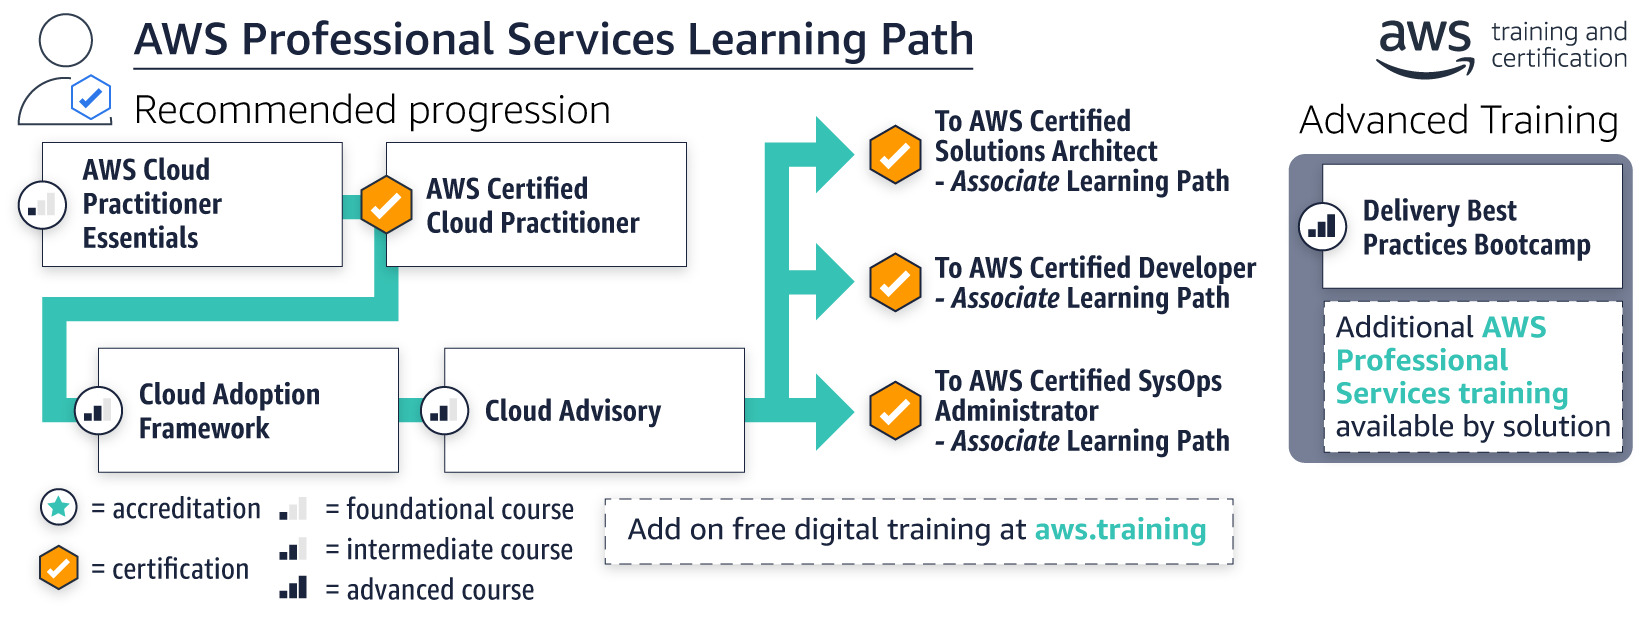 how to become aws certified